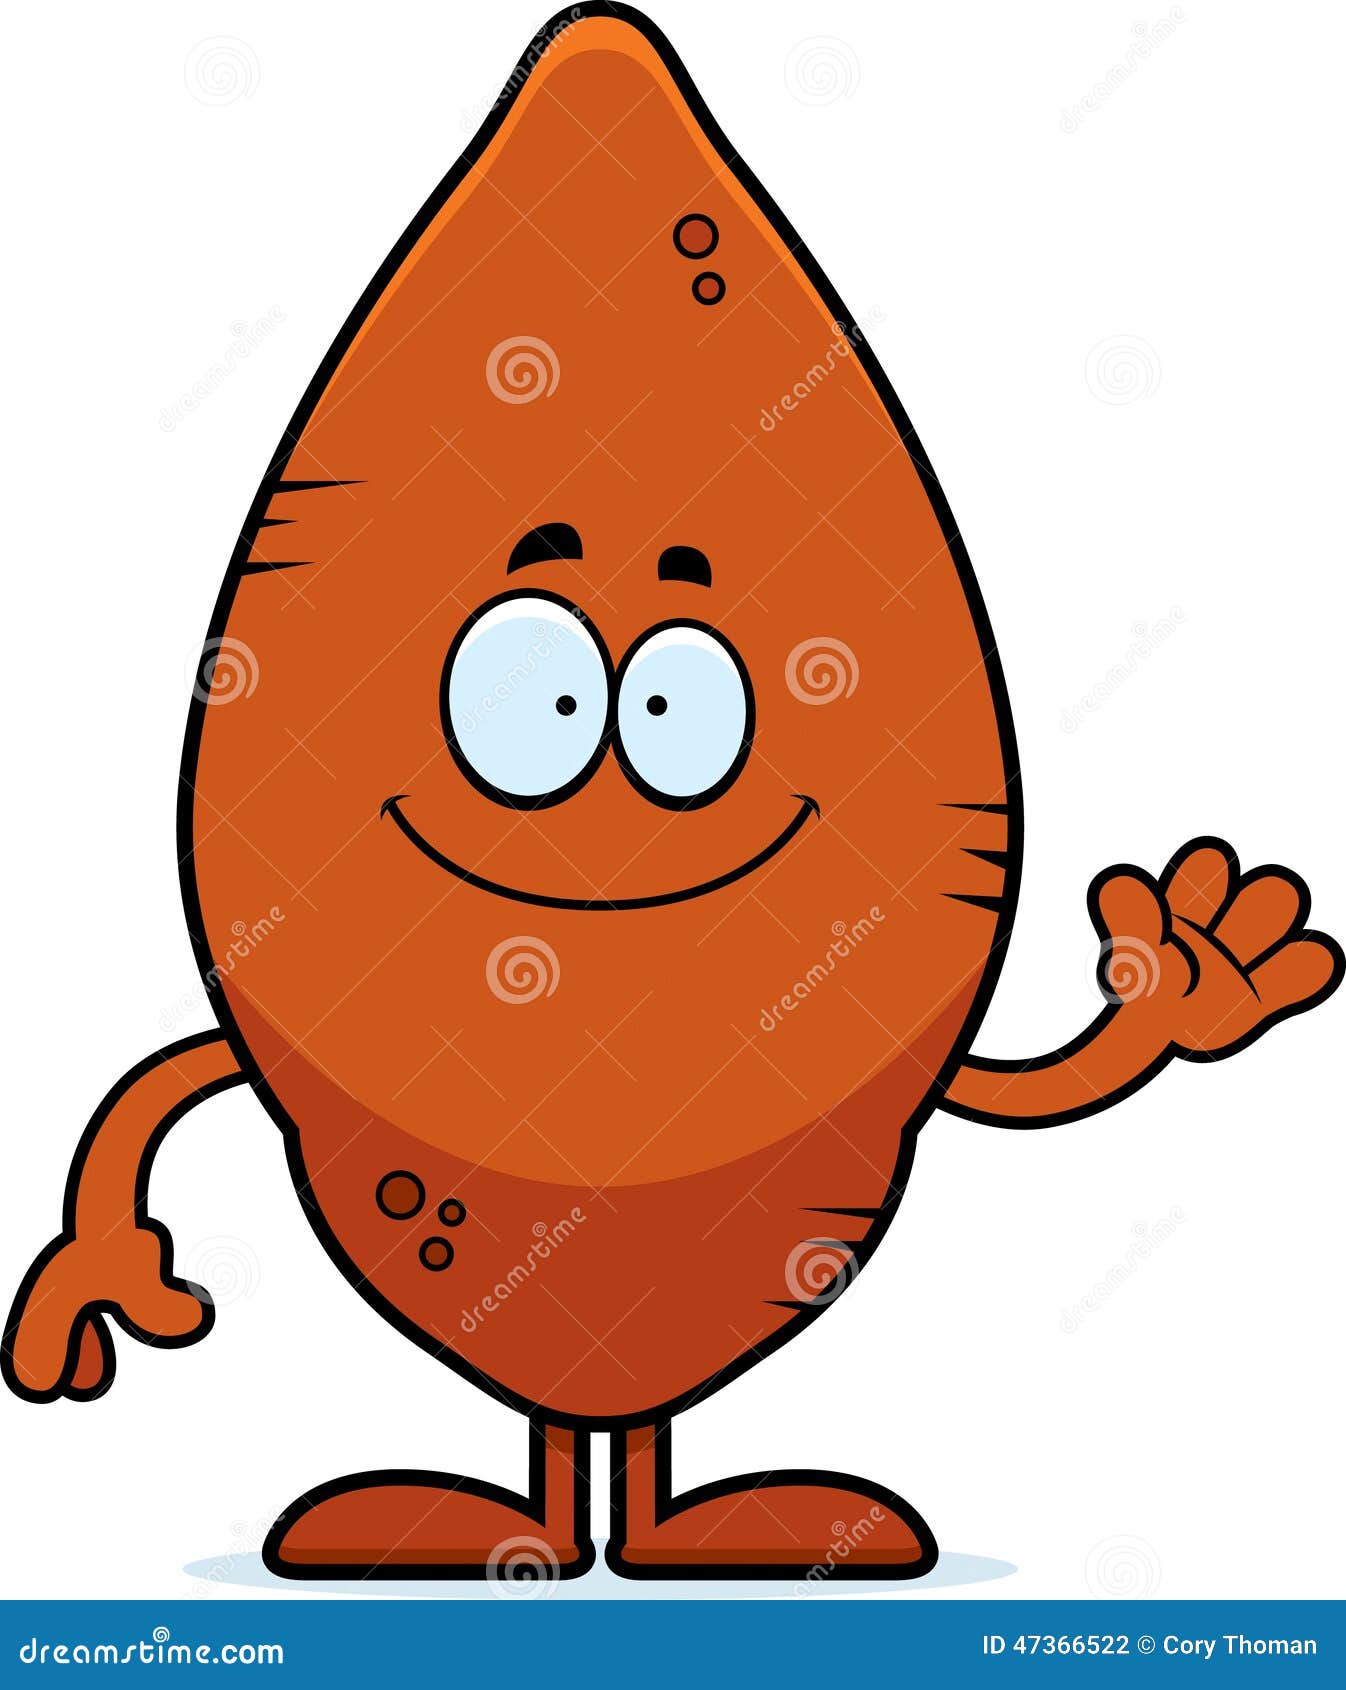 clipart of yam - photo #34